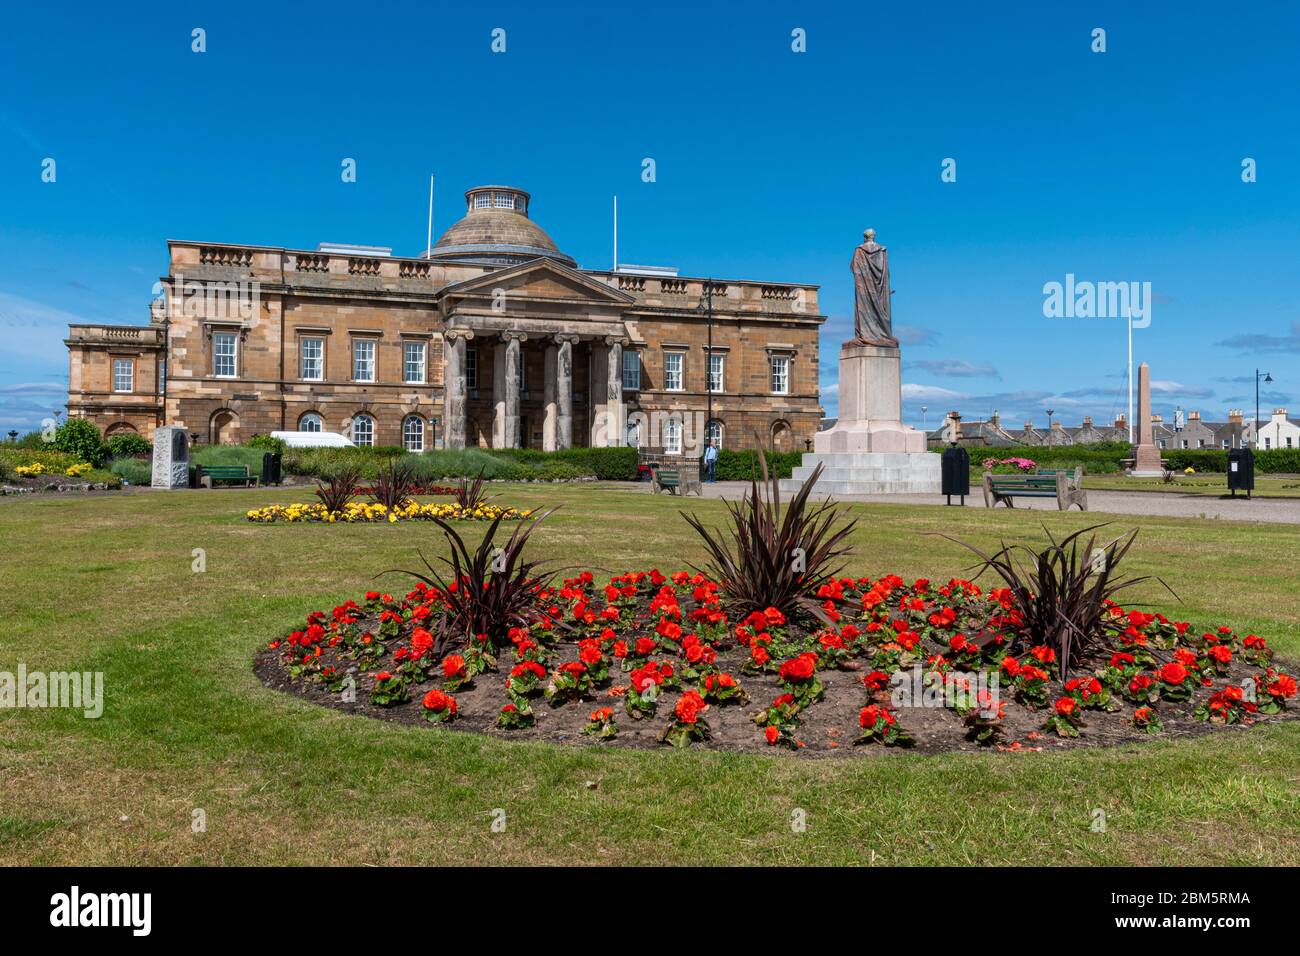 sherrif court and wellington square, ayr town Stock Photo